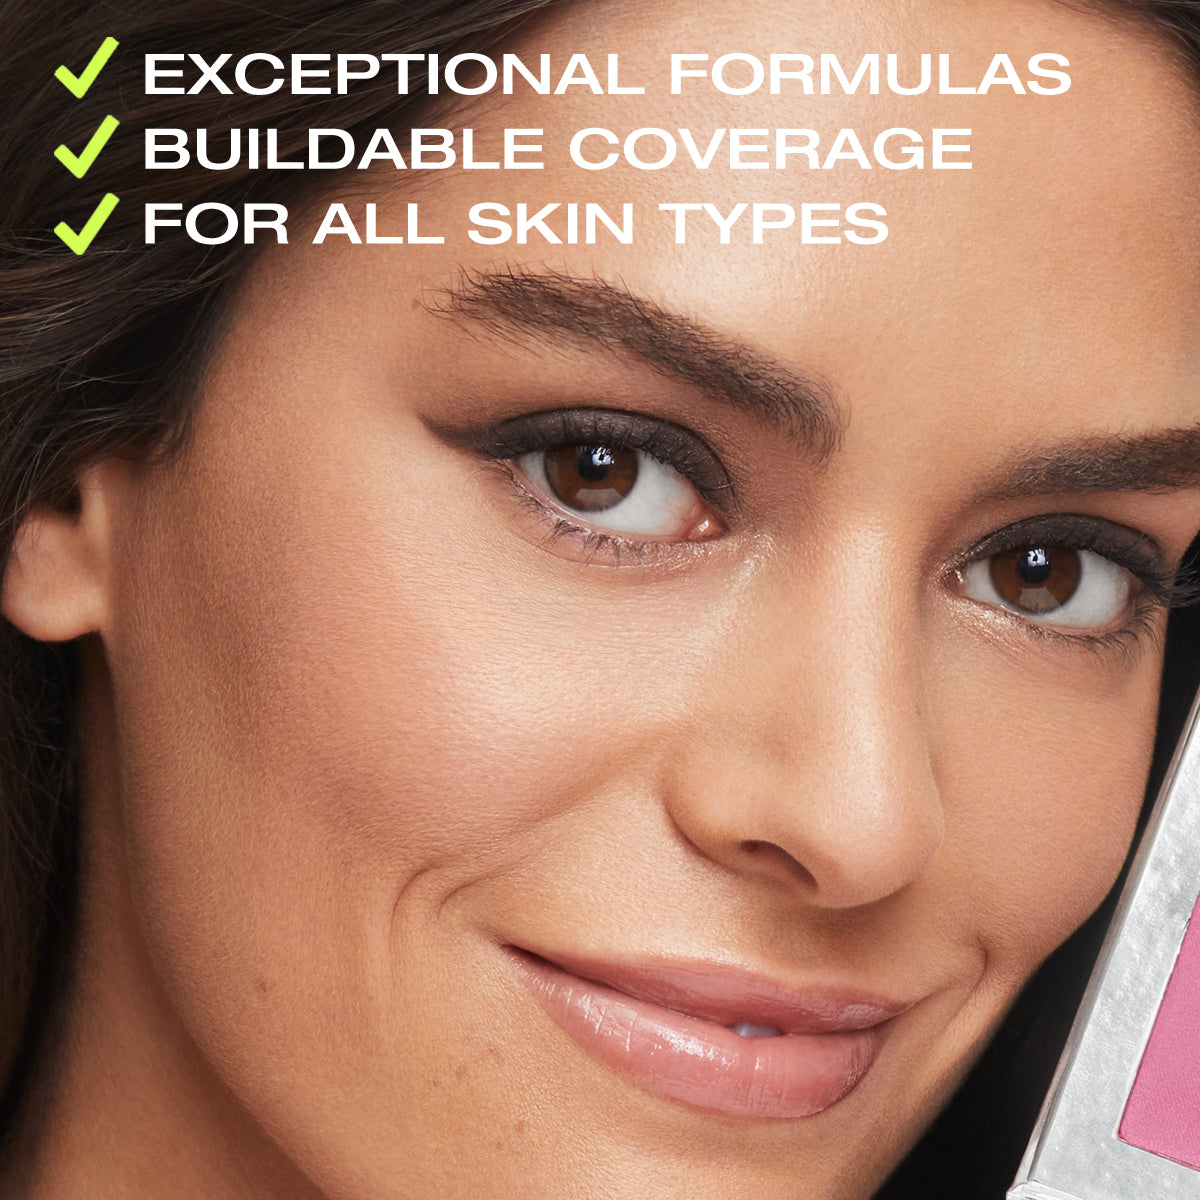 a photo of a beautiful woman with copy on top stating that the coverage in the Fold Out Face is buildable, and the formulas are clean & good for all skin types